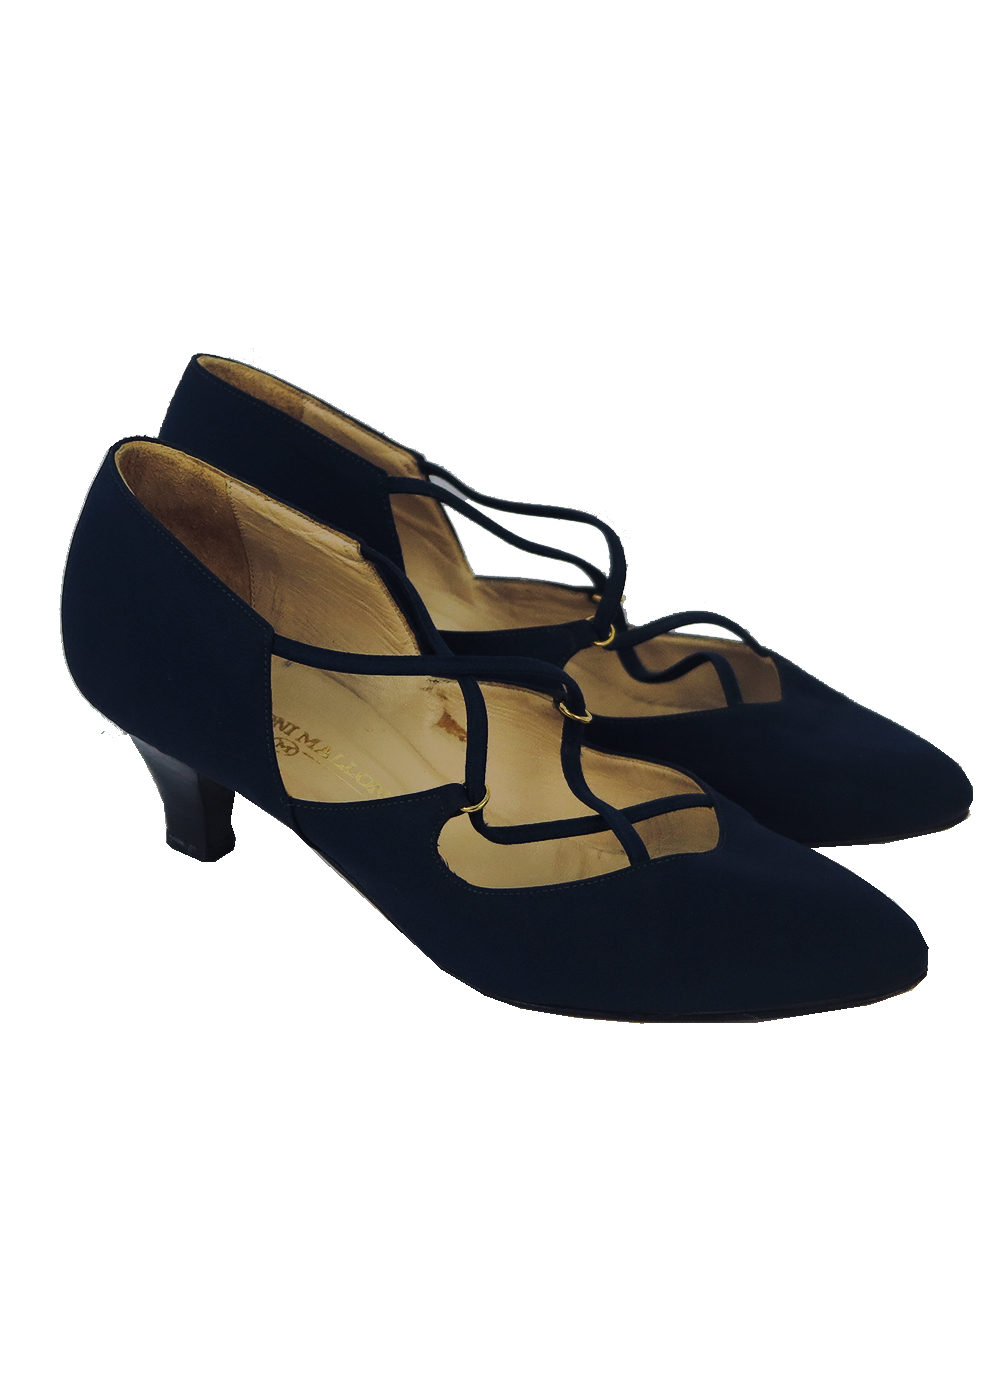 Navy Blue Mid Heel Leather Shoes with 